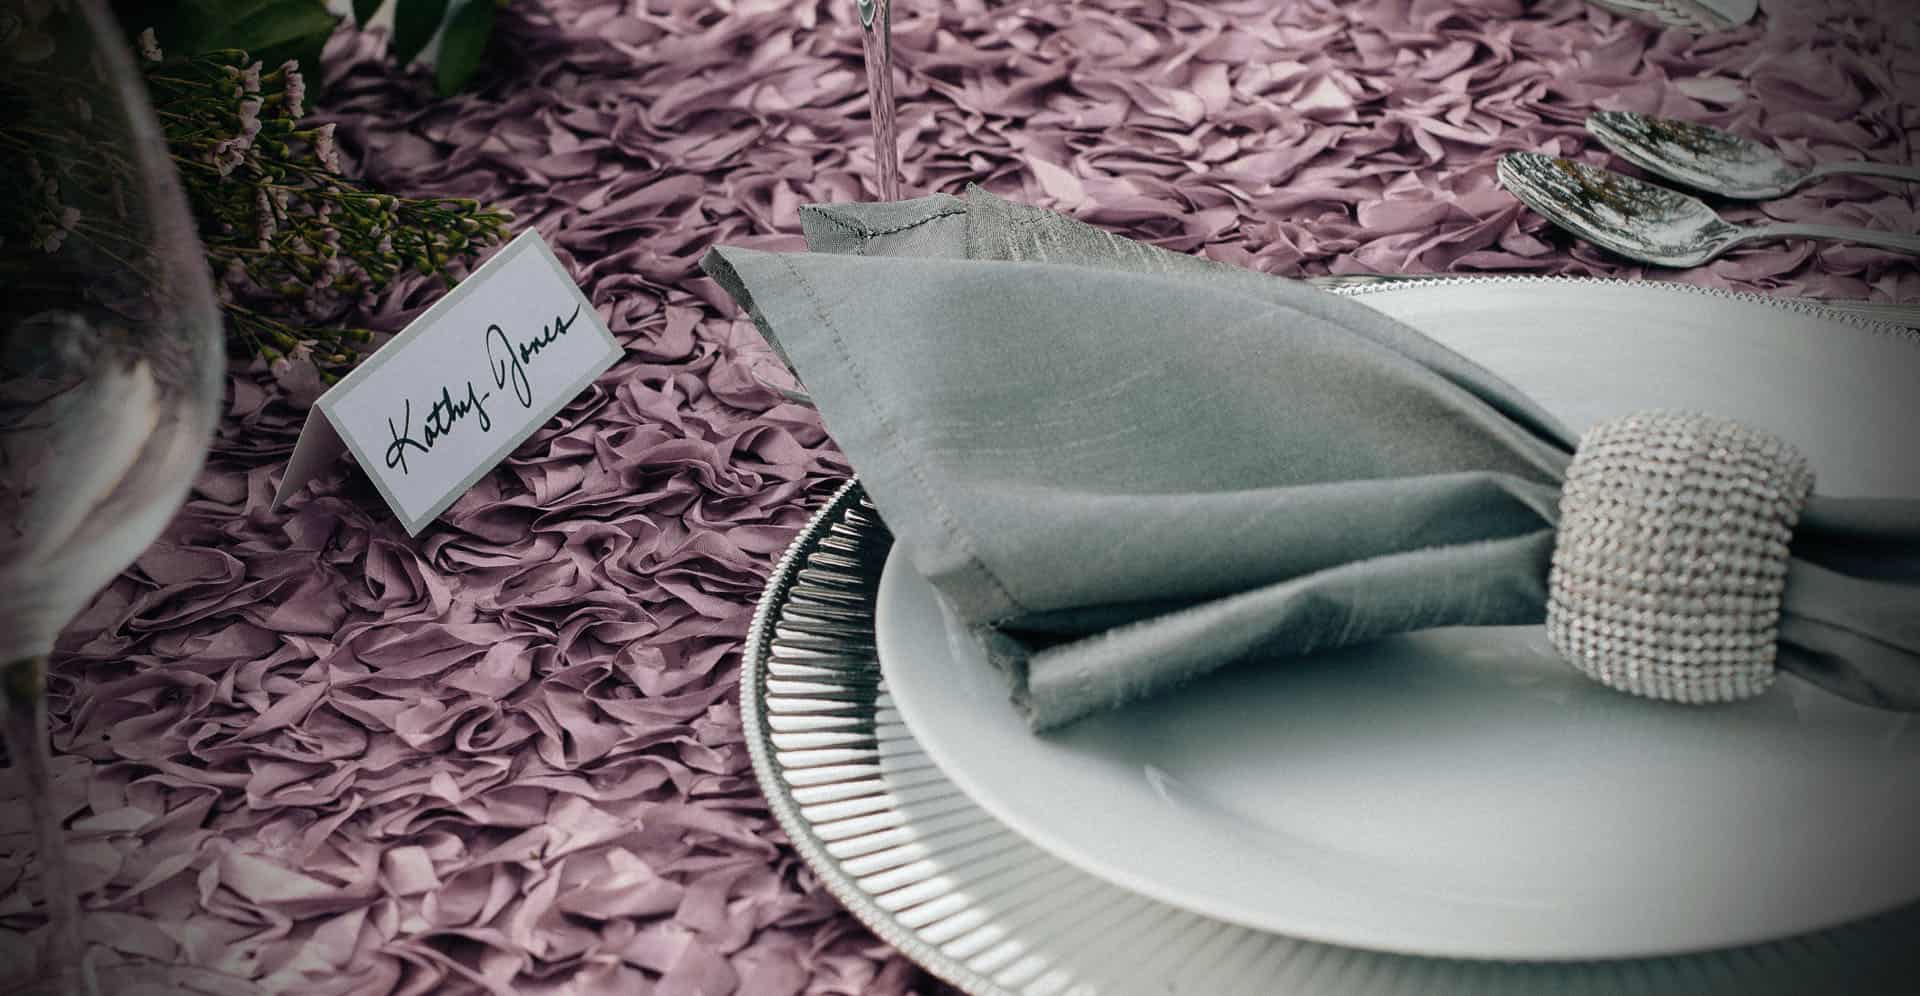 A table set with plates and napkins on top of purple fabric.